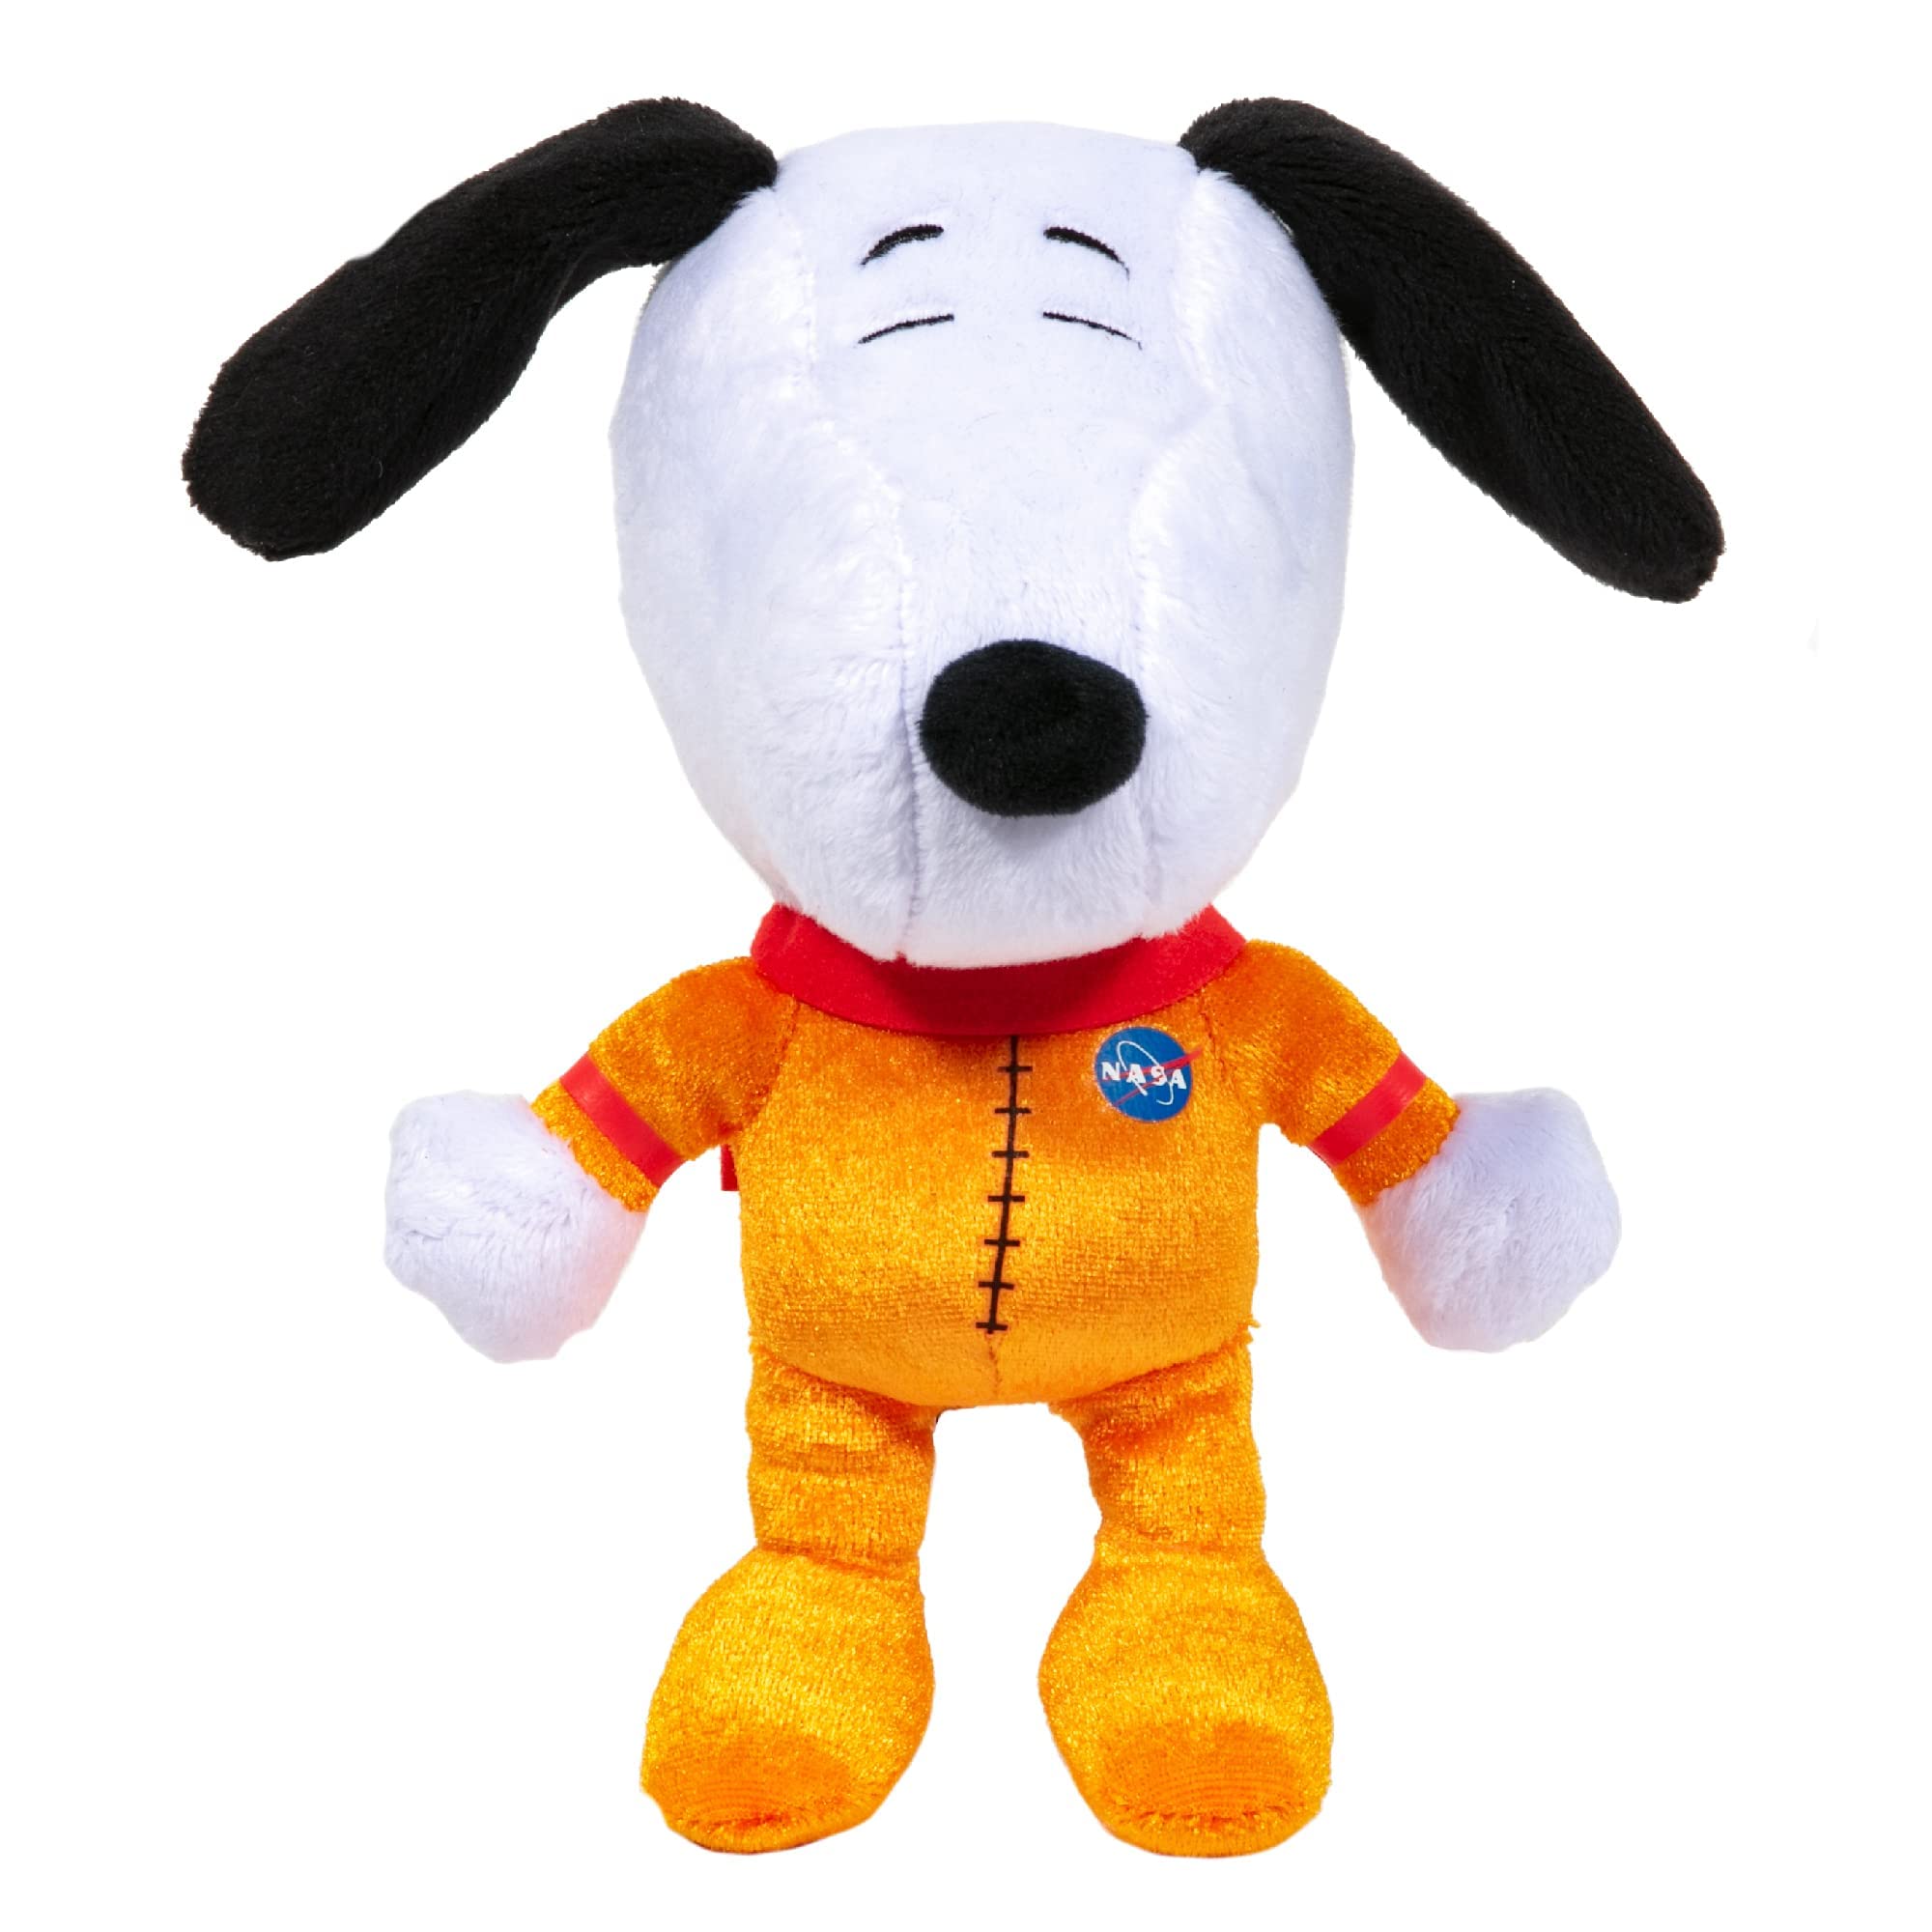 Jinx Official Peanuts Collectible Plush Snoopy, Excellent Plushie Toy for Toddlers & Preschool, Orange NASA Astronaut Snoopy